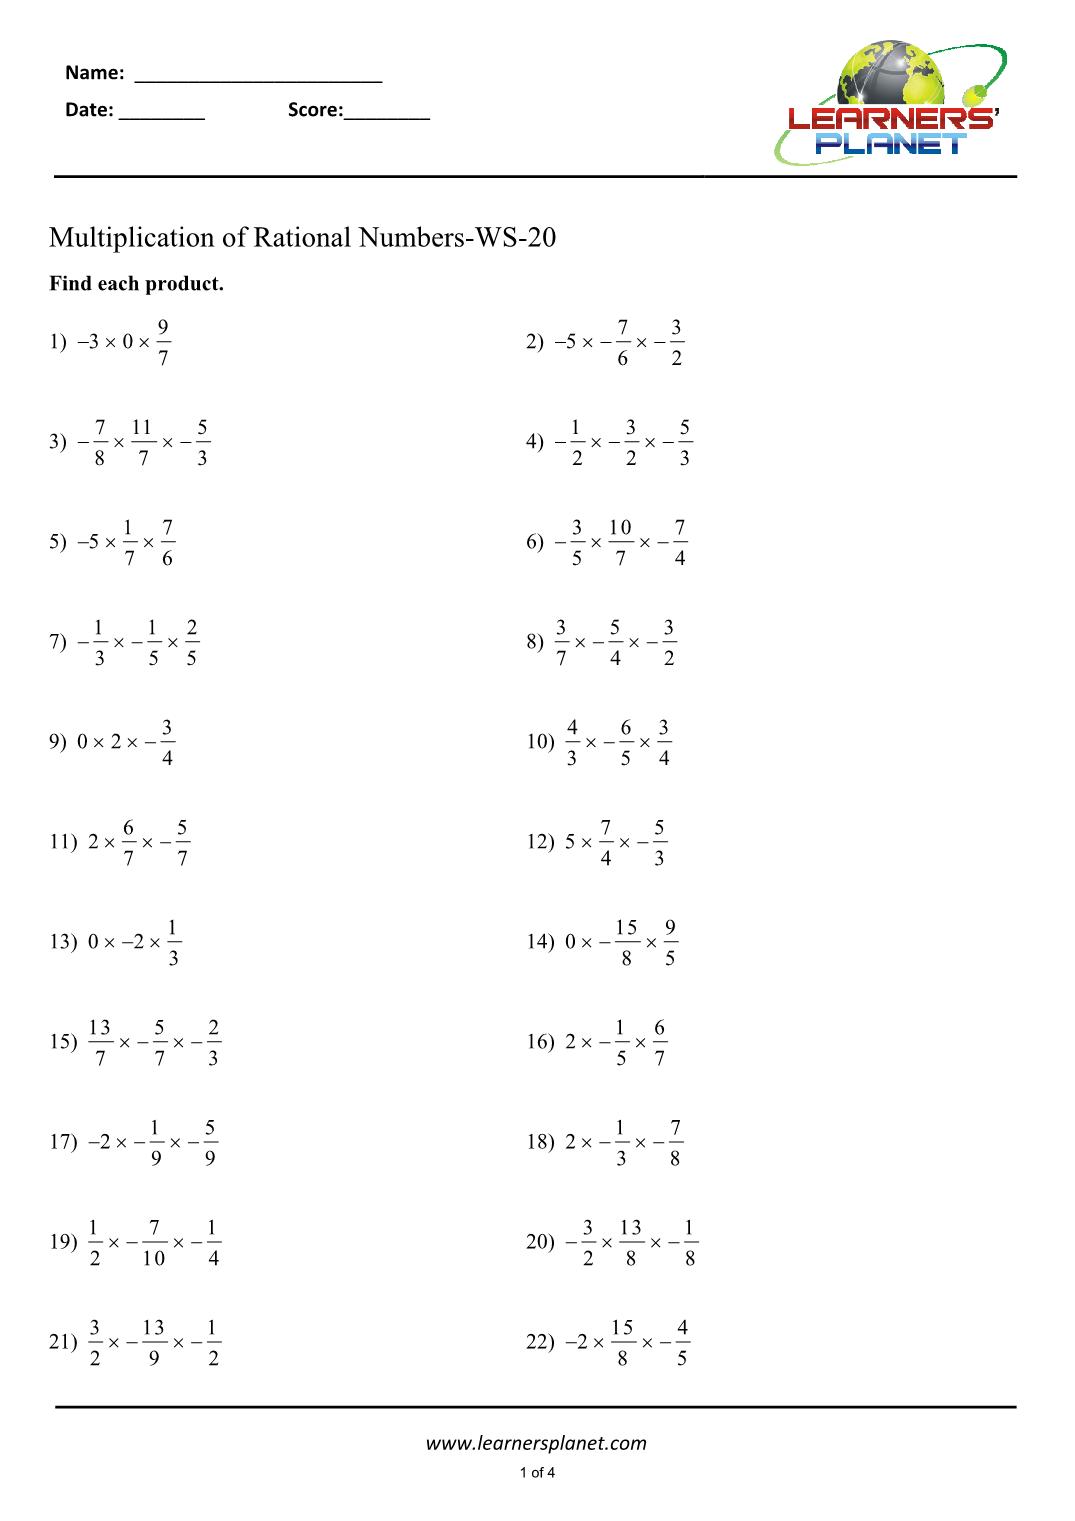 Multiplying rational numbers worksheets maths grade 11 In Multiplying Rational Numbers Worksheet